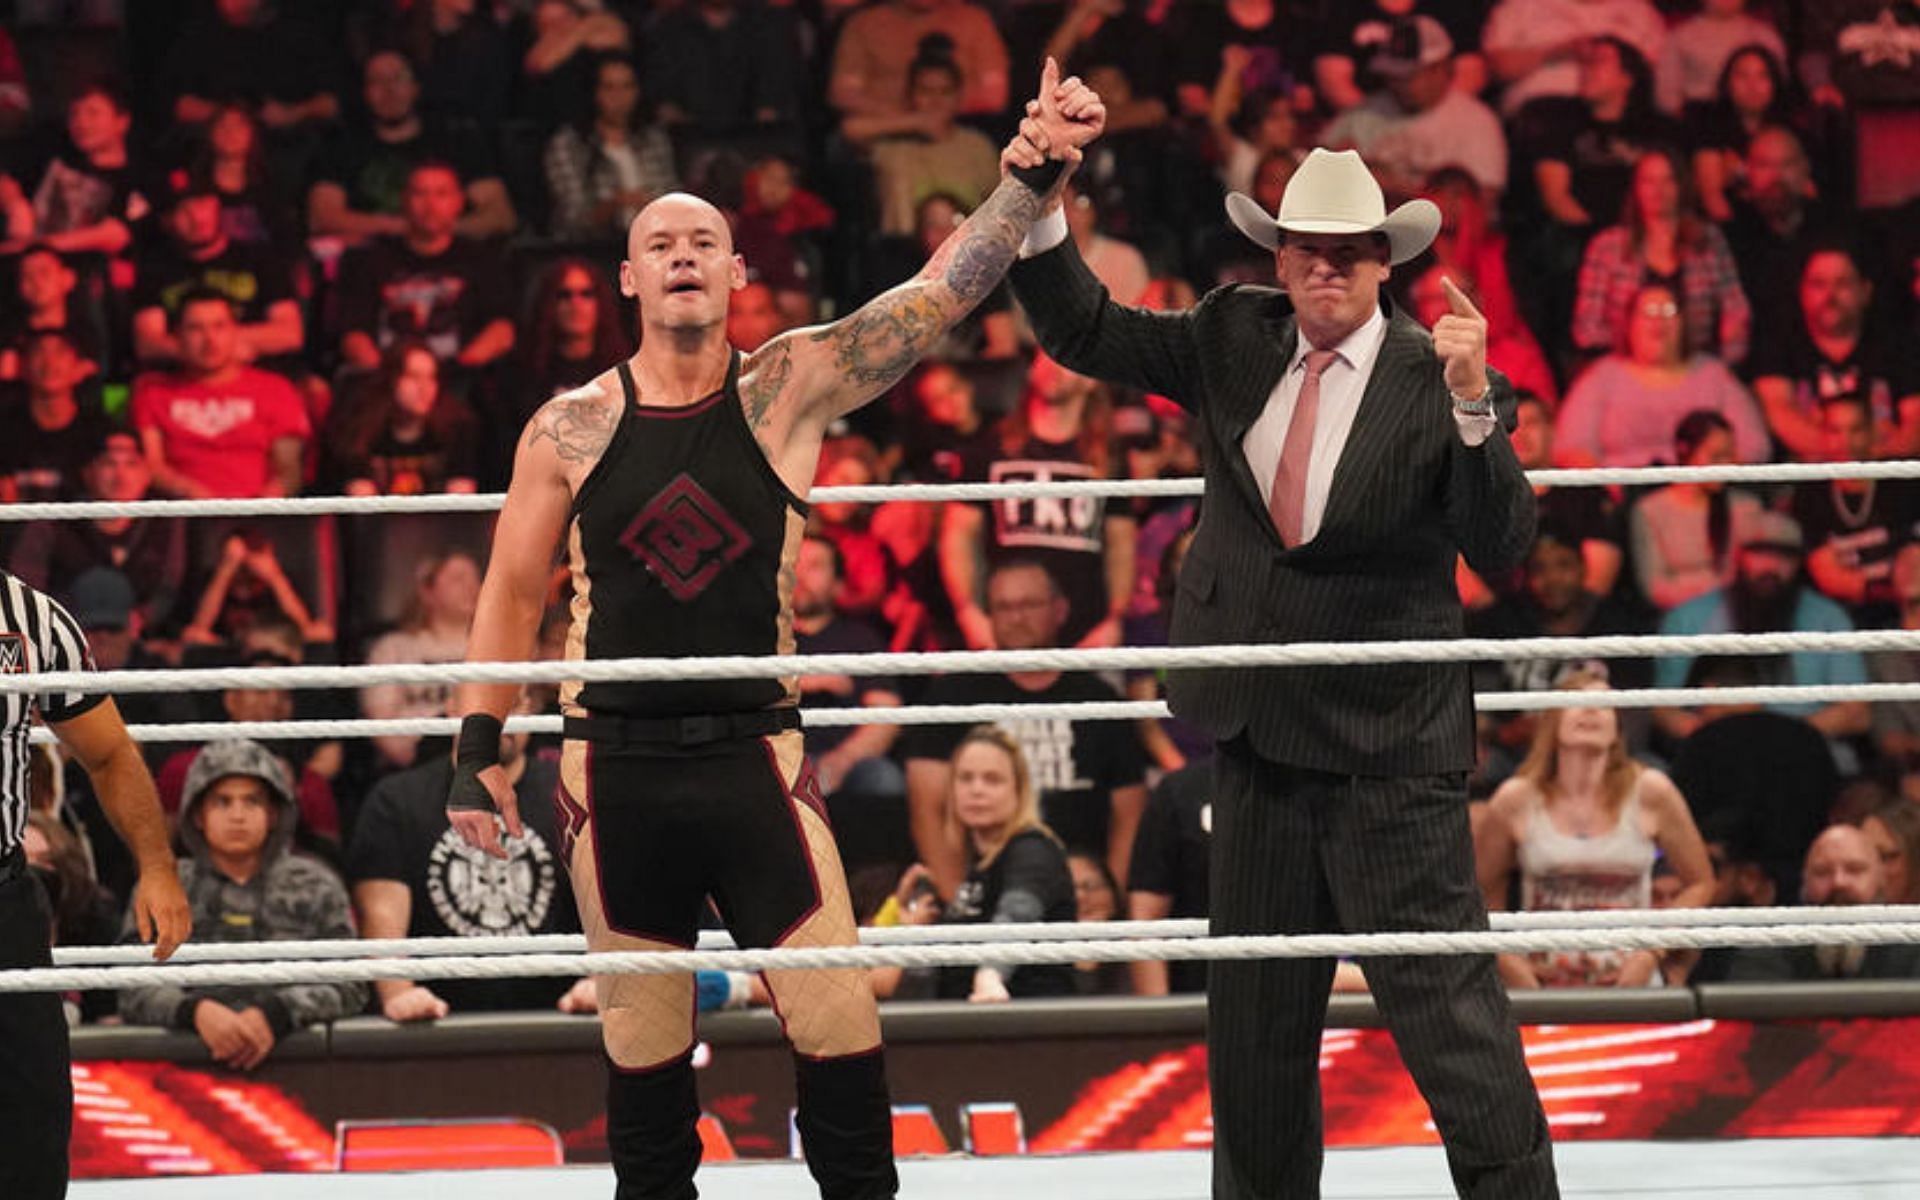 Baron Corbin recently formed an alliance with JBL!